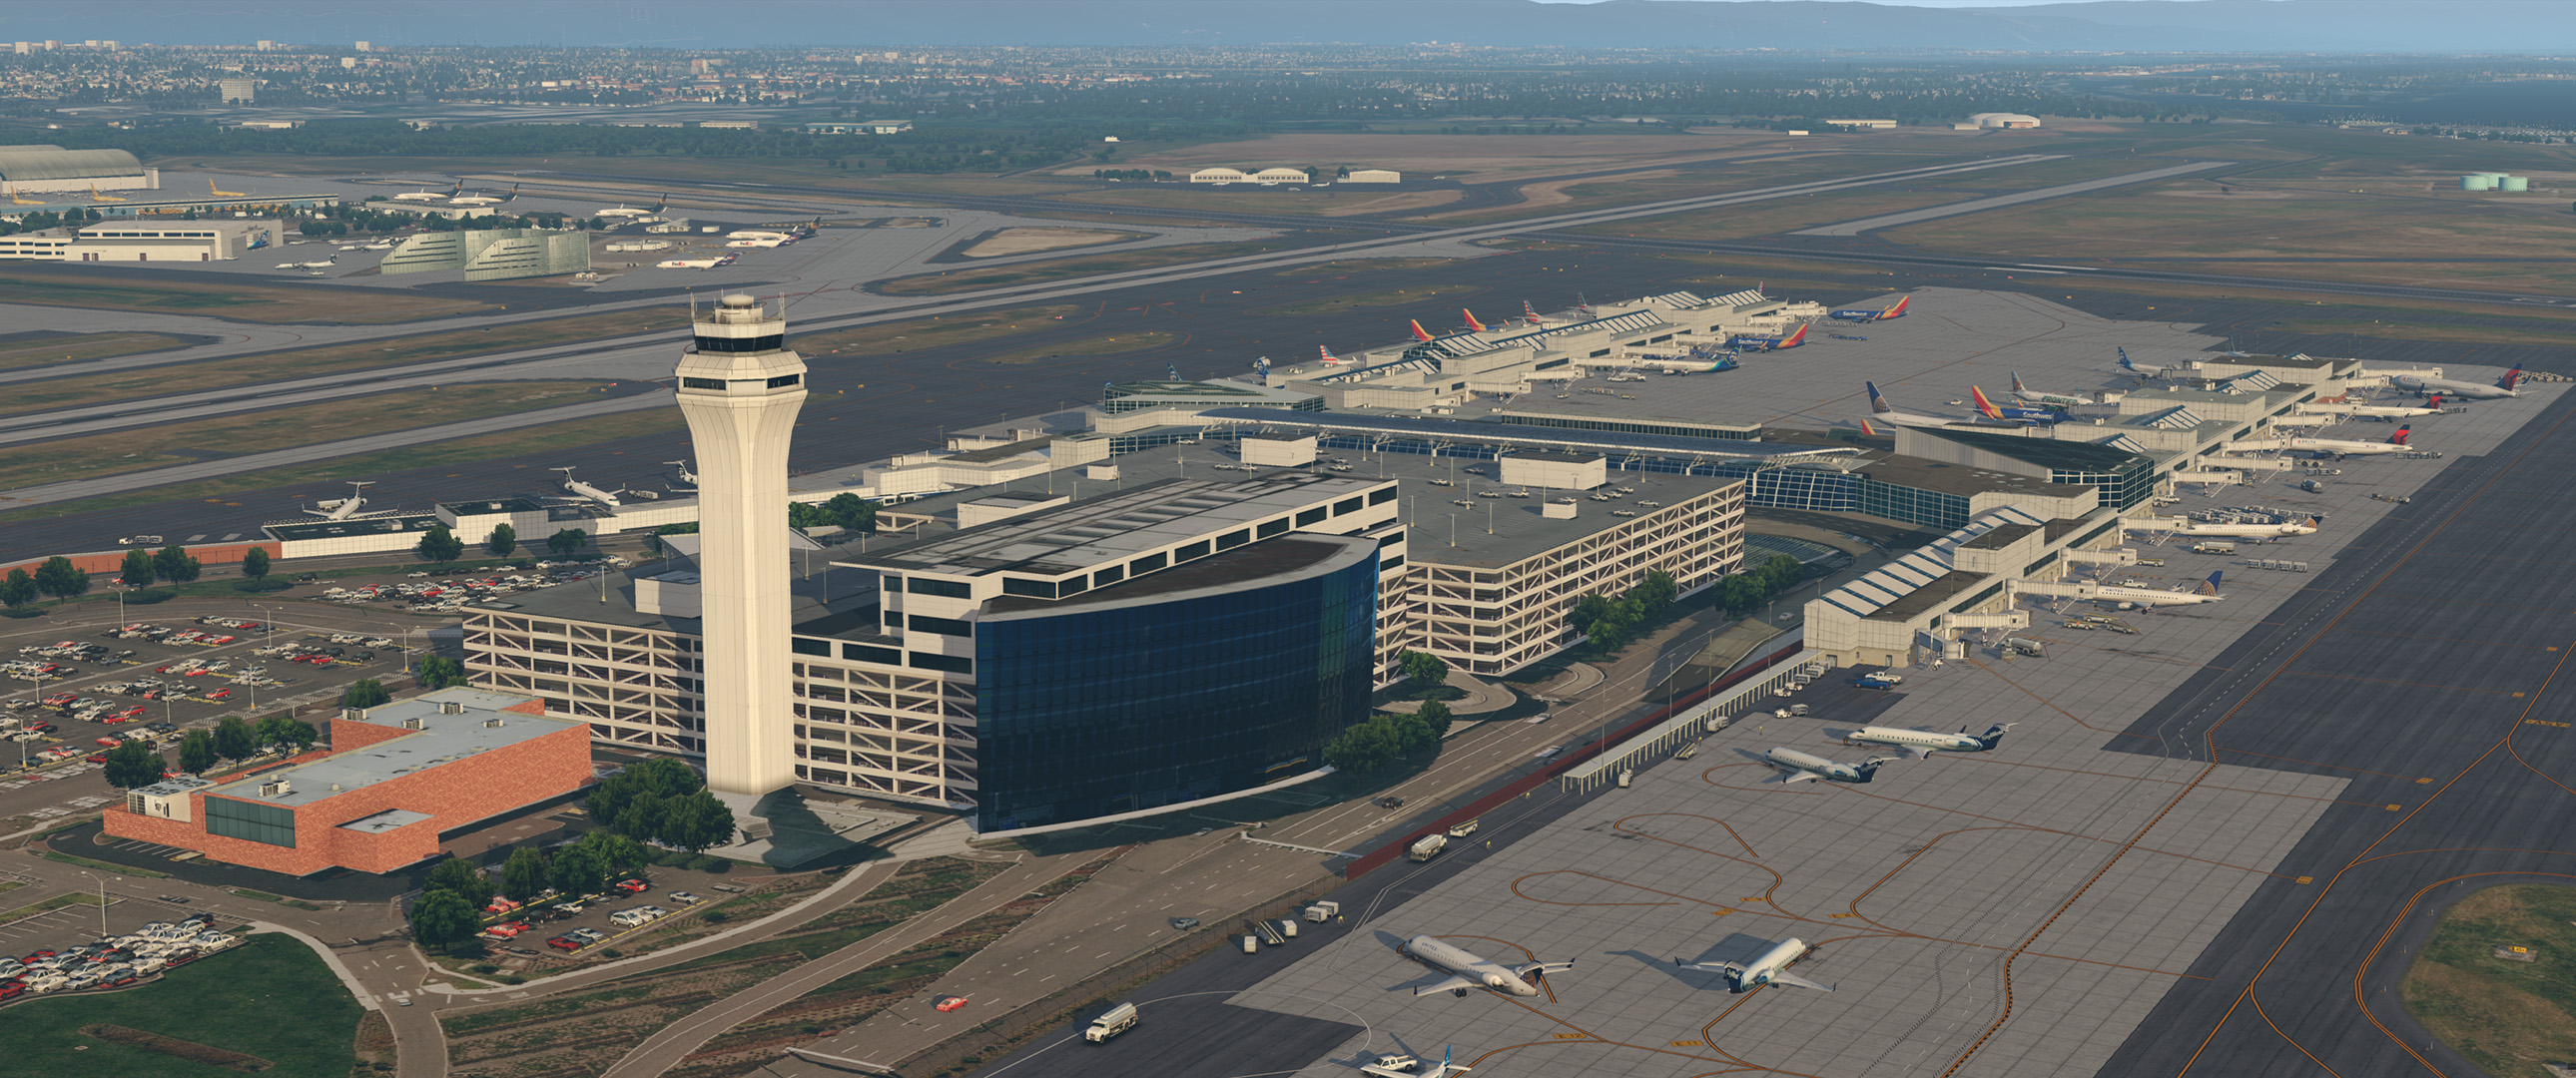 Best Freeware Sceneries for X-Plane 11 image 94